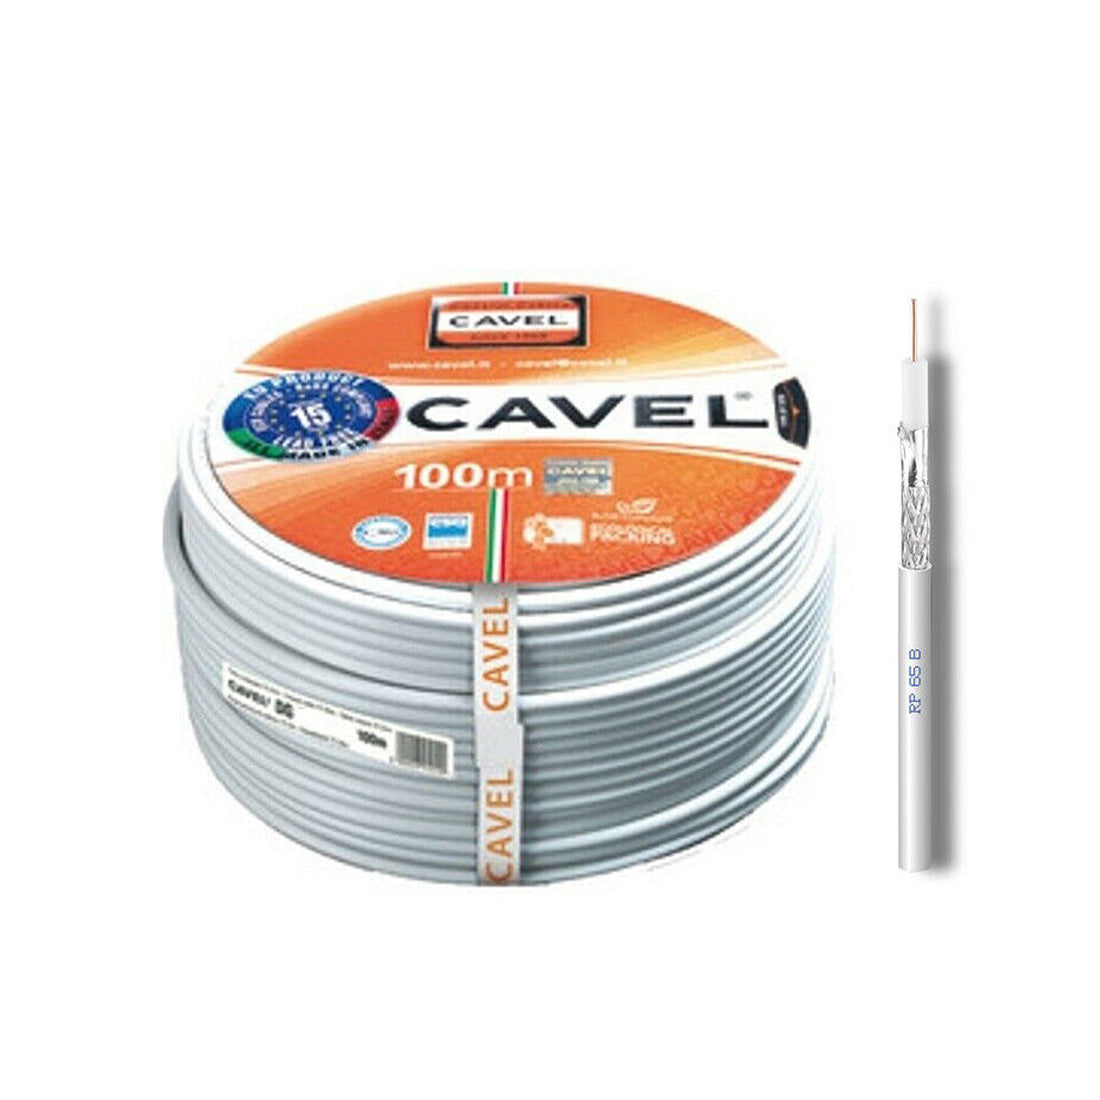 Cavel Coaxial cable 75 Ohm 100 m reel Made in Italy for internal use, antenna cable, coaxial cable with shielding